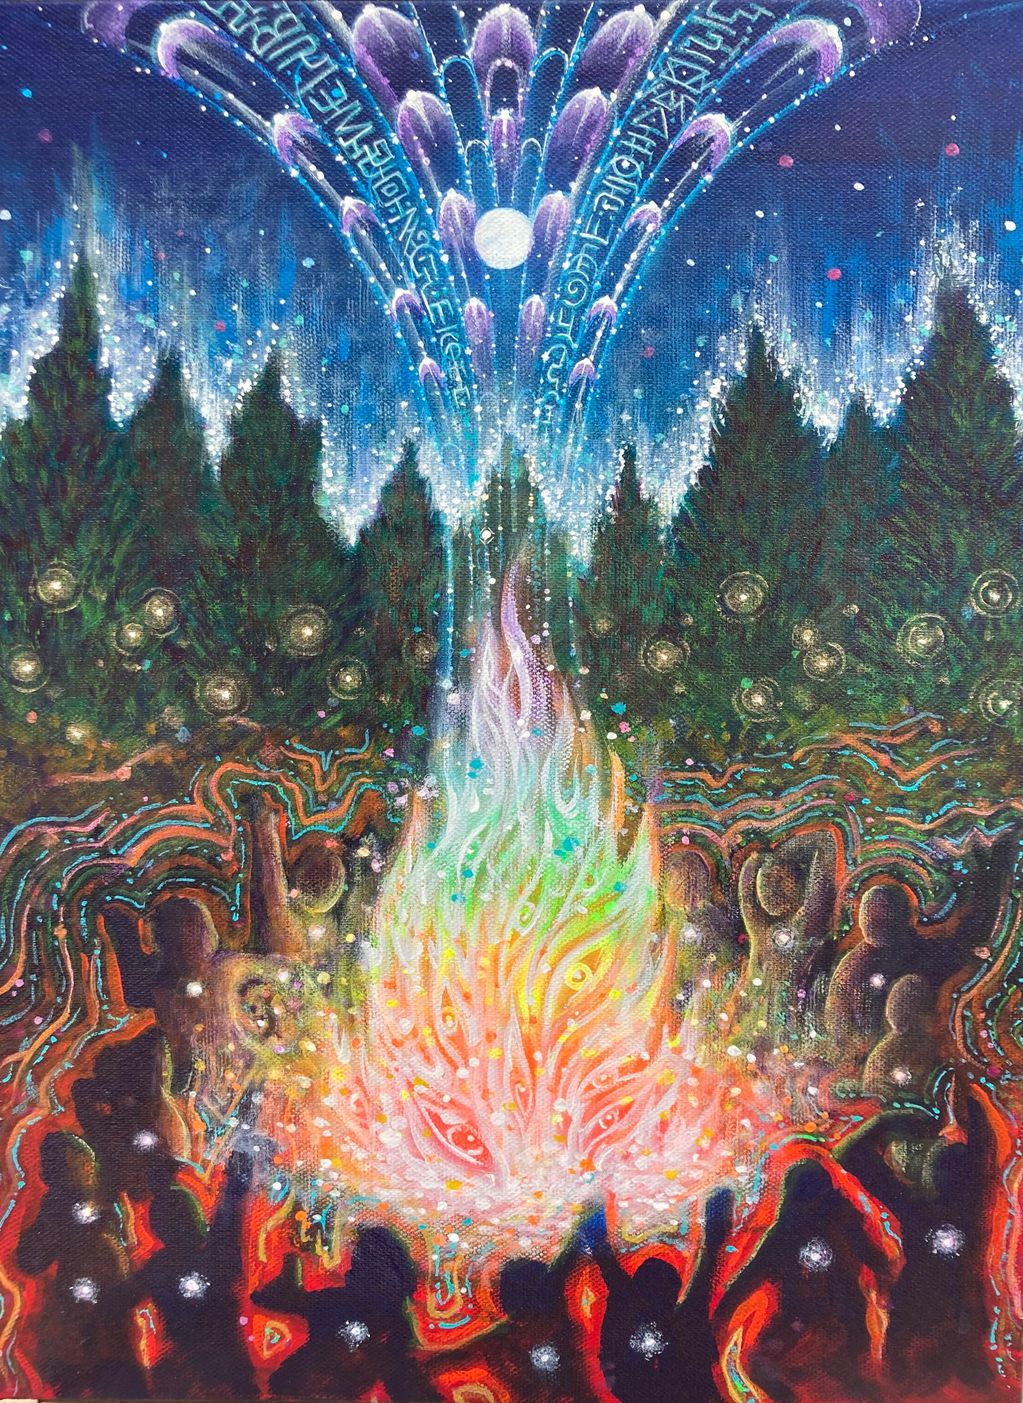 rainbow fire people dancing in forest silhouettes full moon magic language